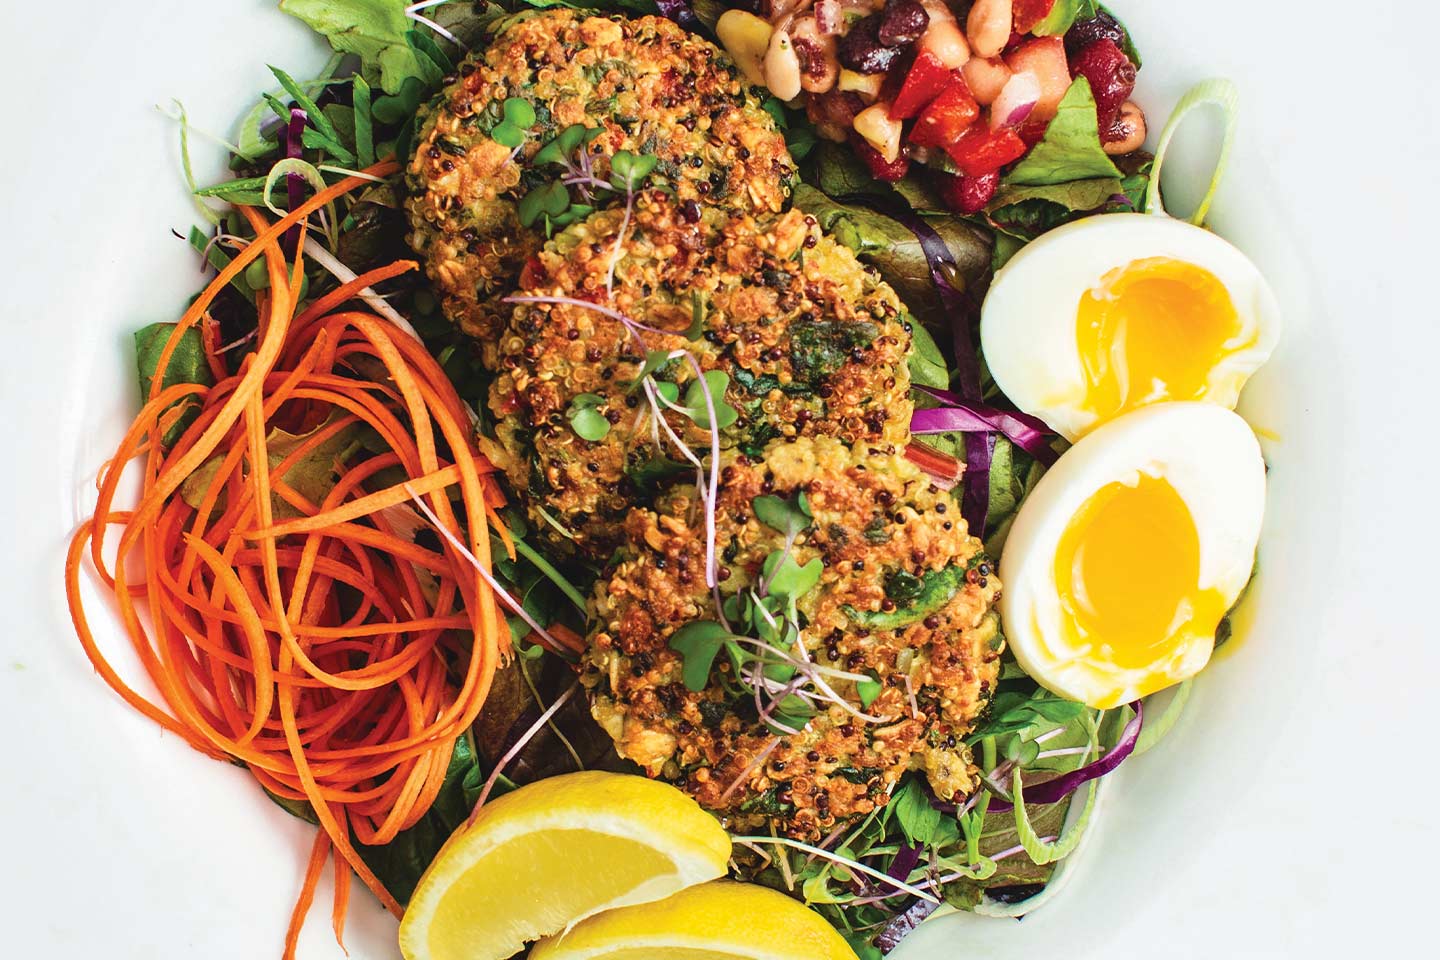 spinach and quinoa cakes from cafe 7 at rock city in chattanooga